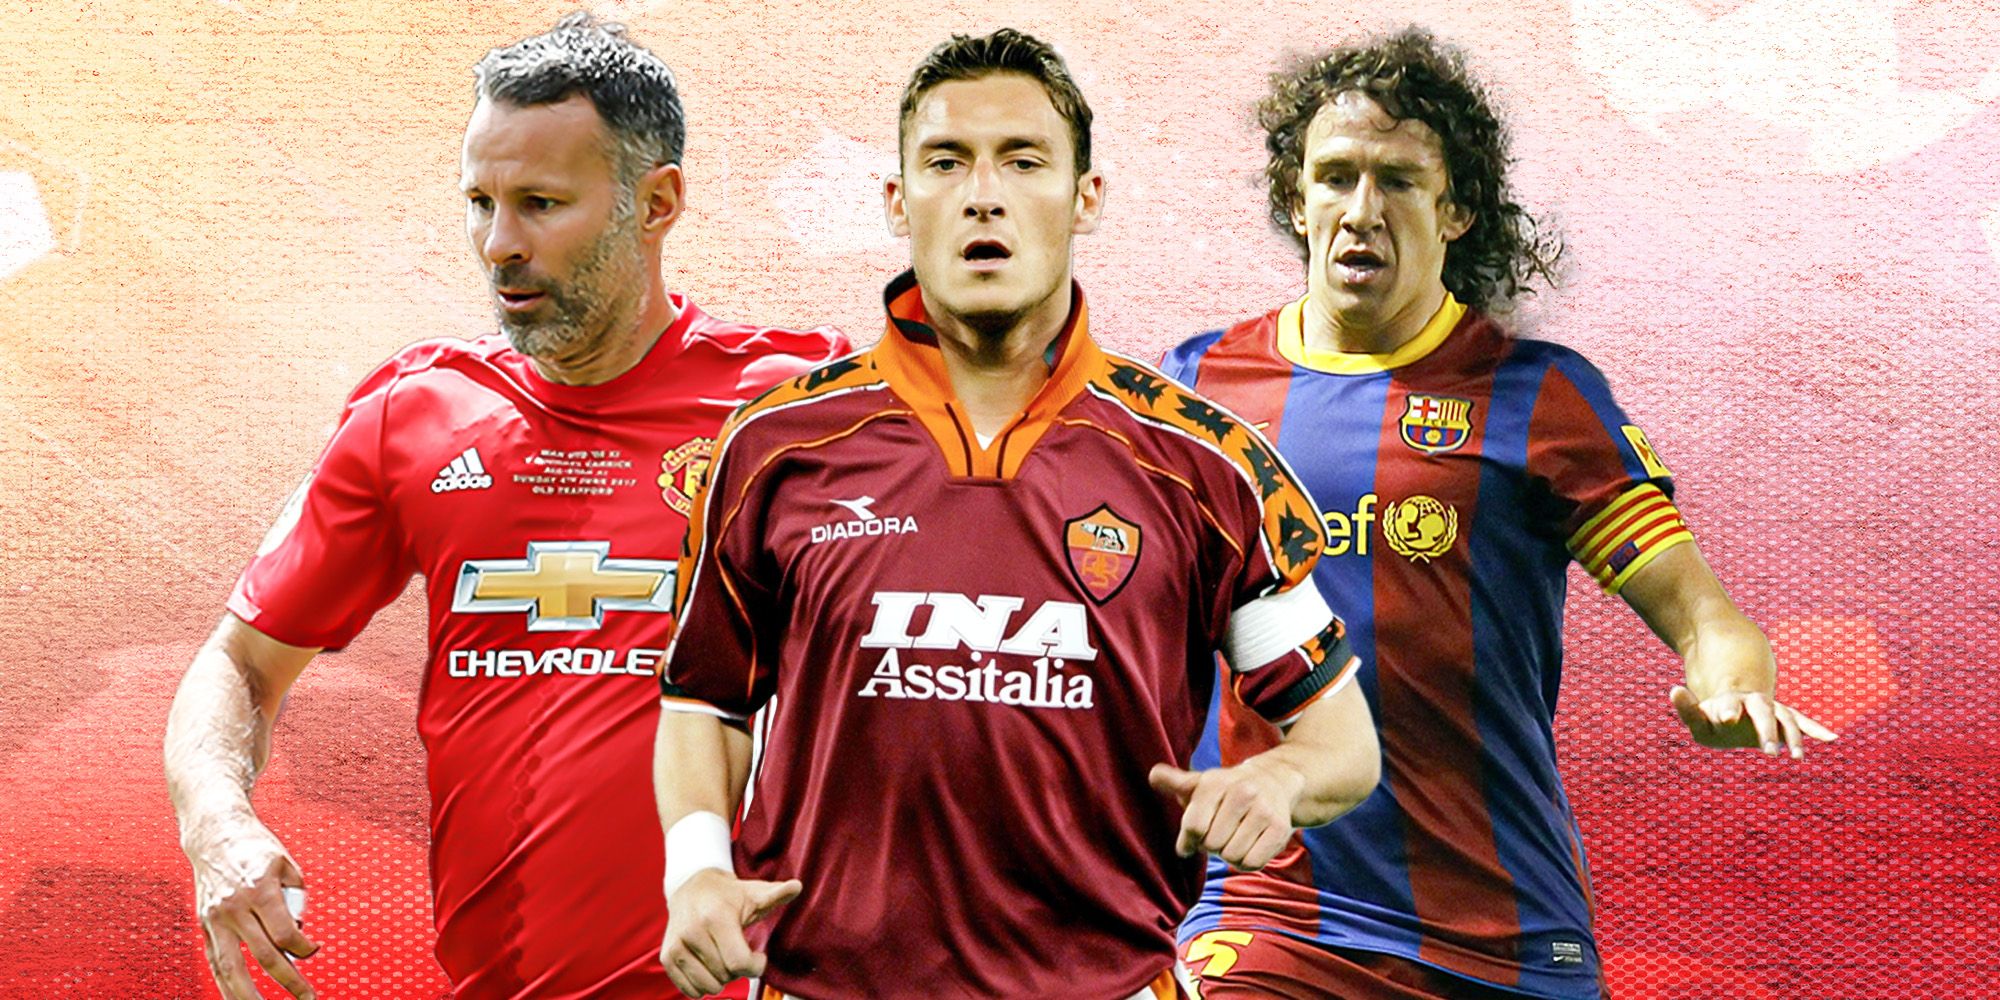 Collage featuring Man Utd's Ryan Giggs, Roma's Francesco Totti and Barcelona's Carlos Puyol.